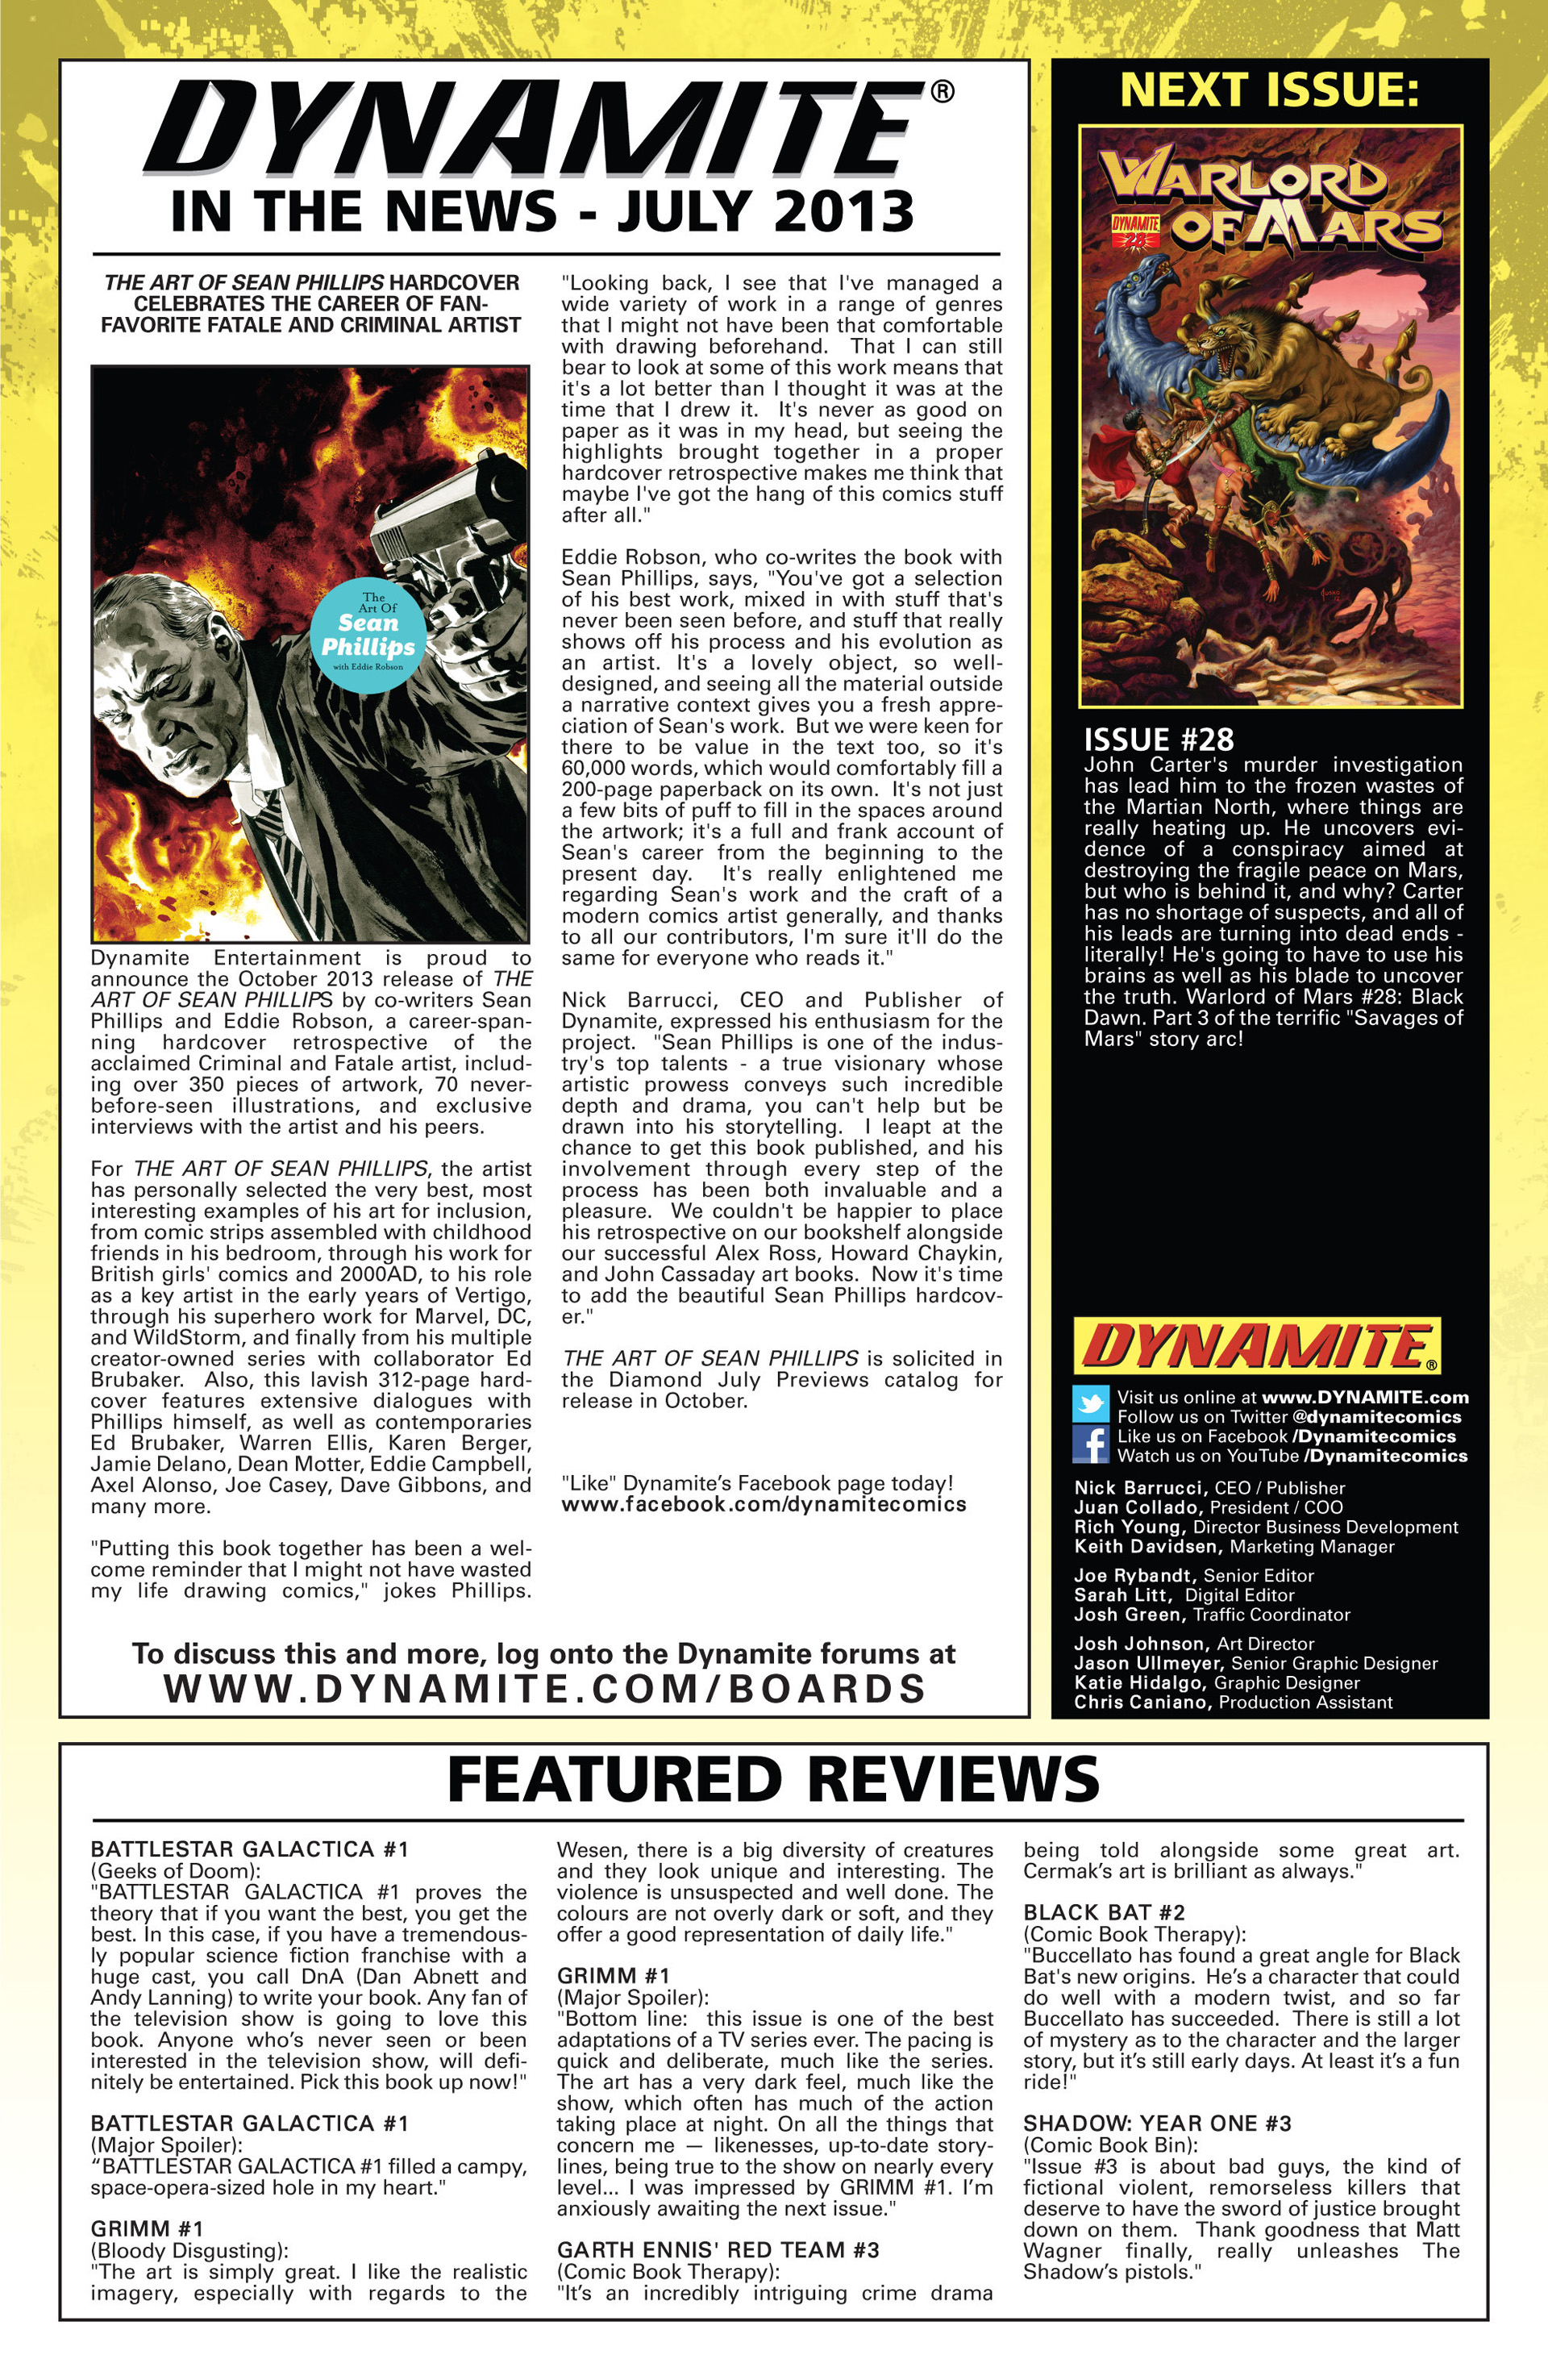 Read online Warlord of Mars comic -  Issue #27 - 26